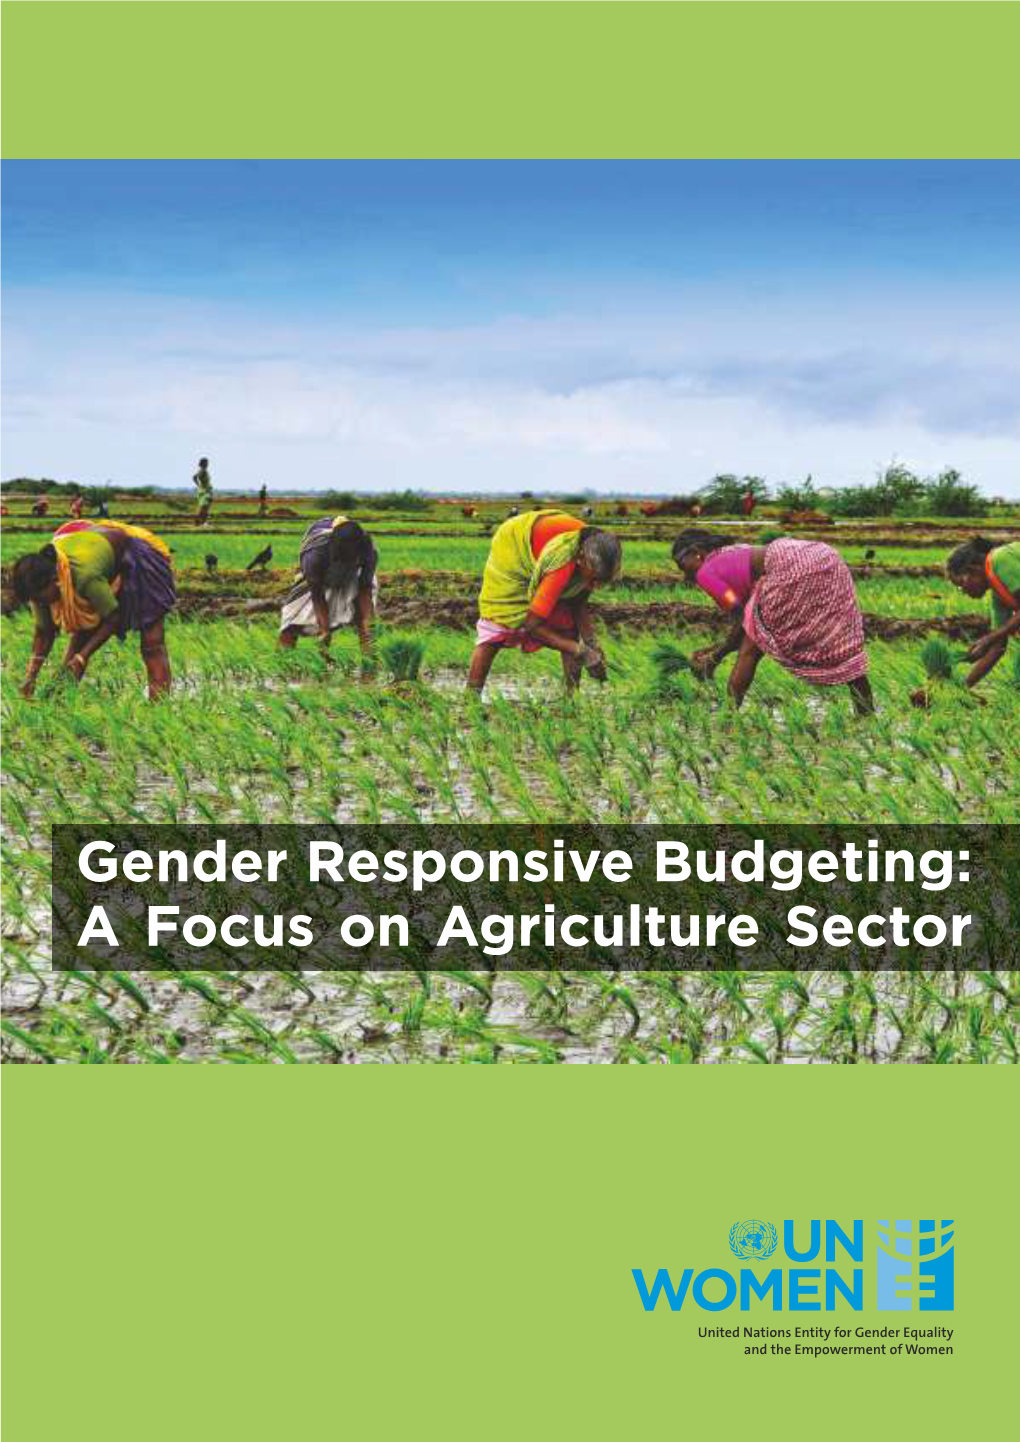 Gender Responsive Budgeting: a Focus on Agriculture Sector © 2017 UN Women